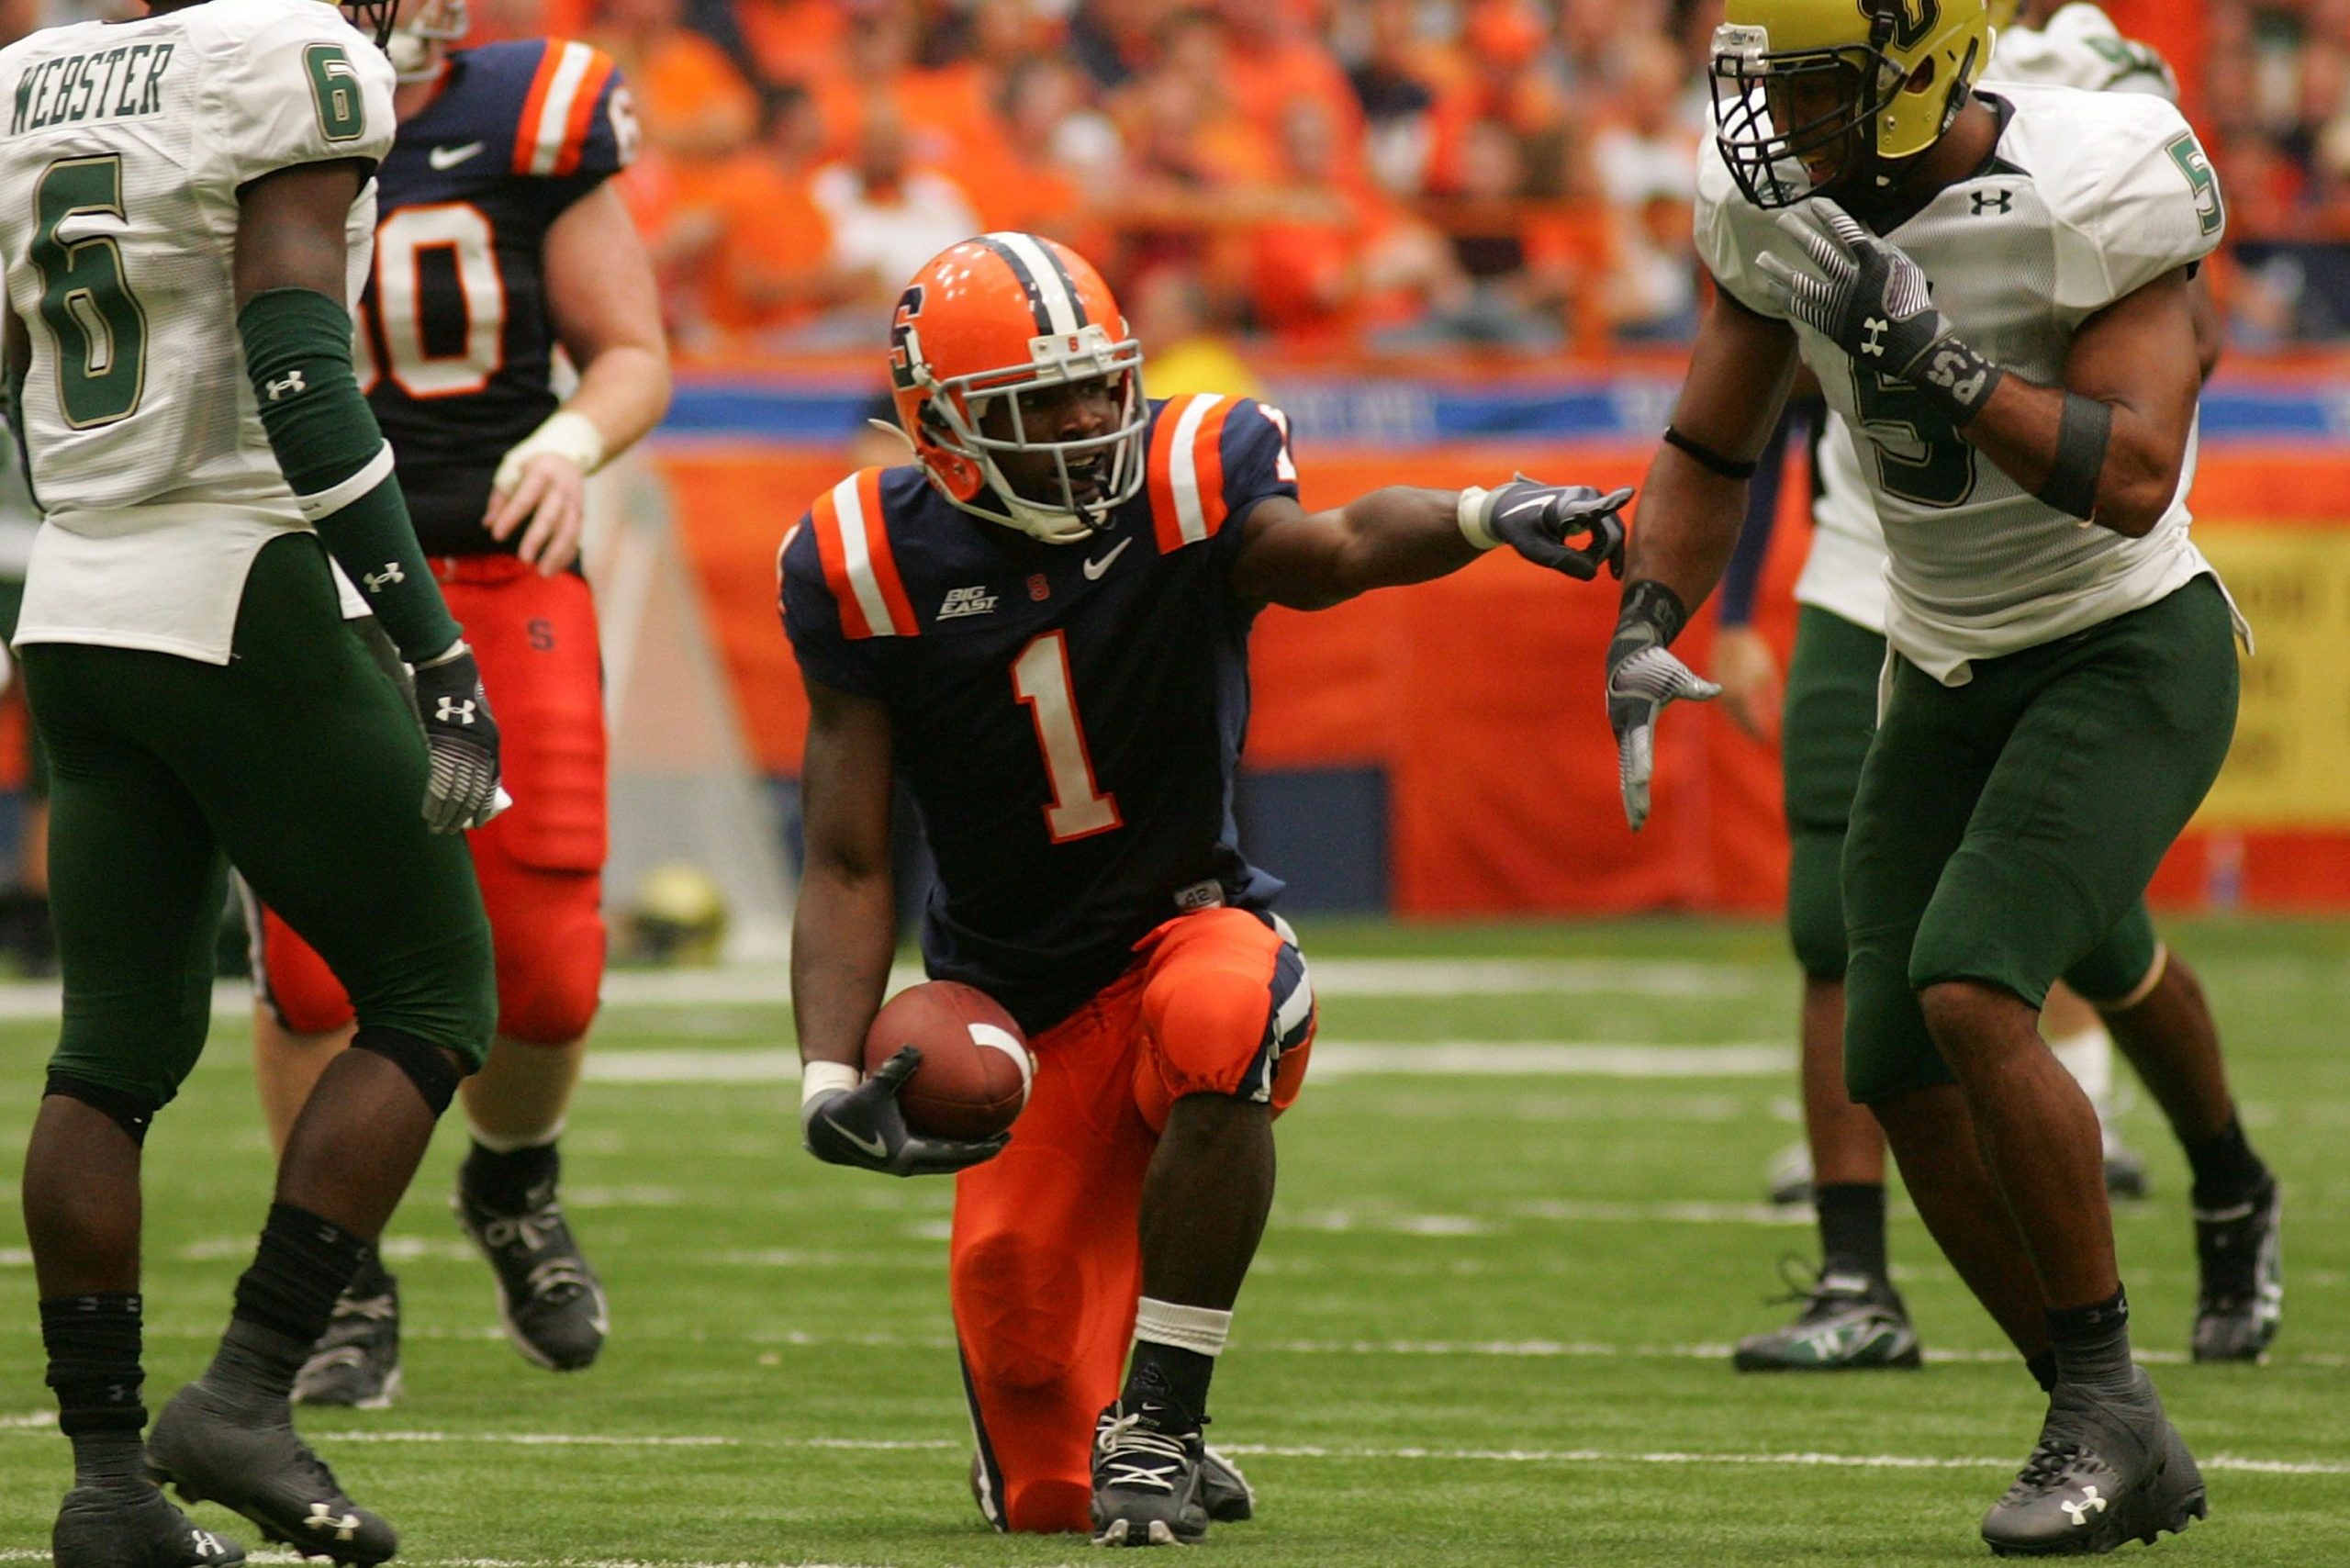 Mike Williams #1 of the Syracuse Orange celebrates a first down during the game against the South Florida Bulls at the Carrier Dome on October 3, 2009 in Syracuse, New York.